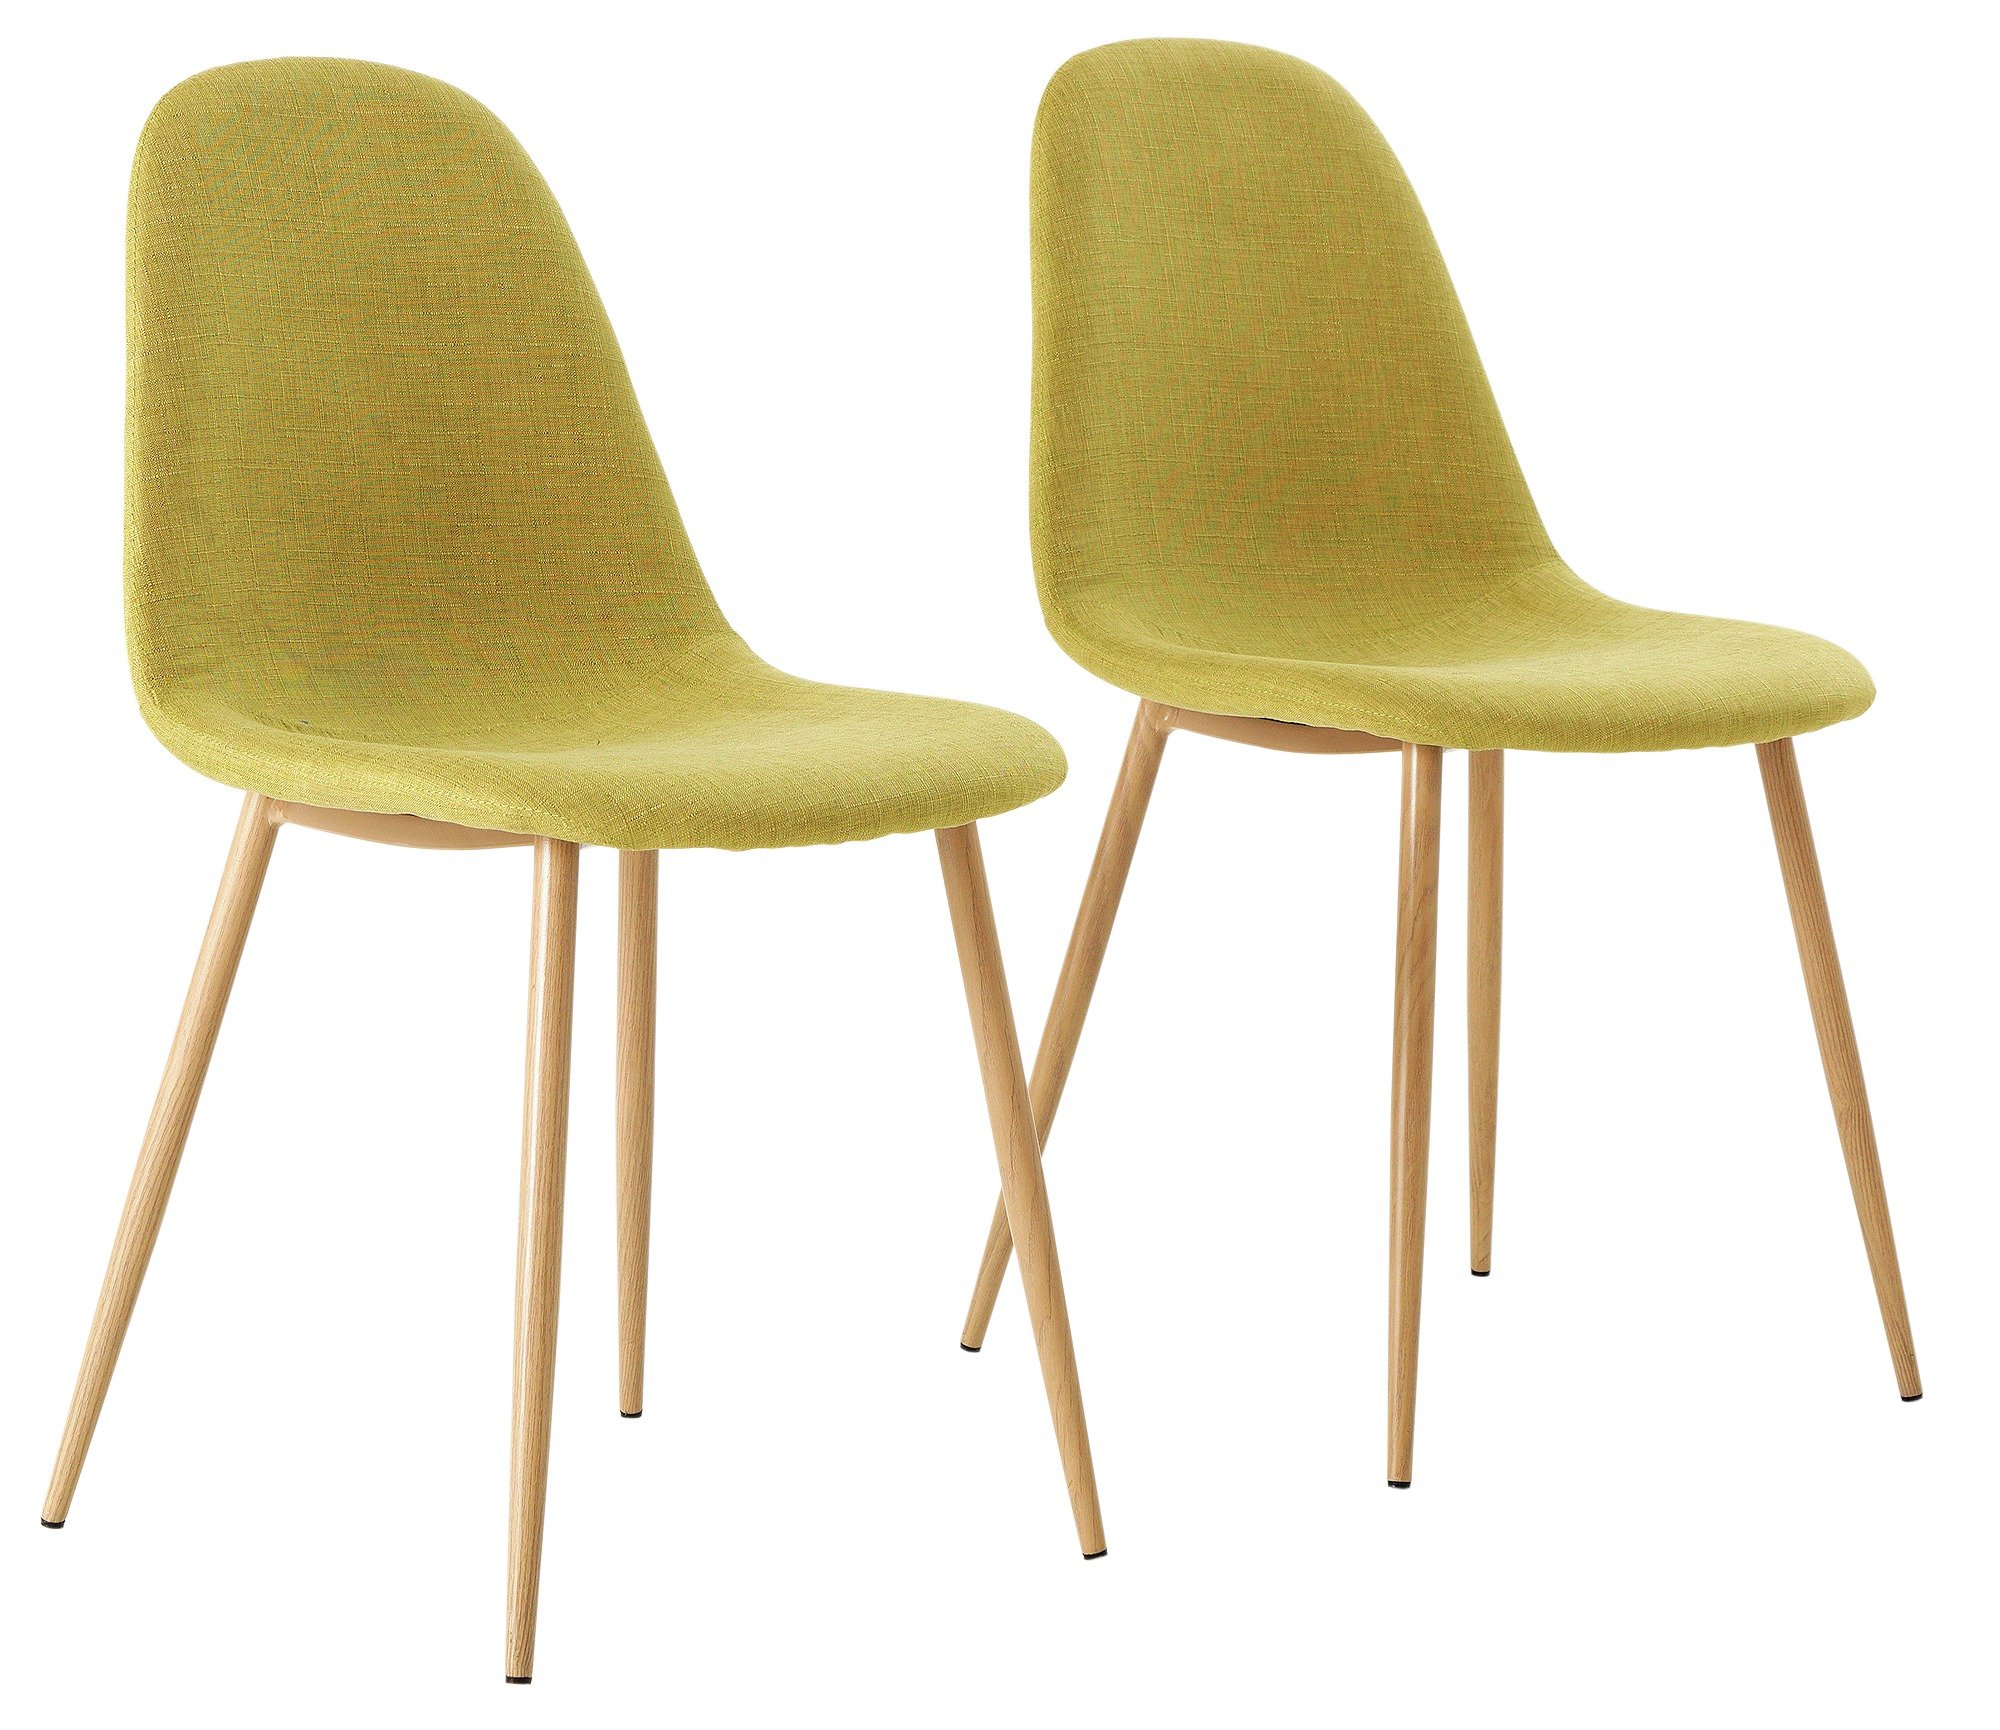 Hygena Beni Pair of Dining Chairs - Green